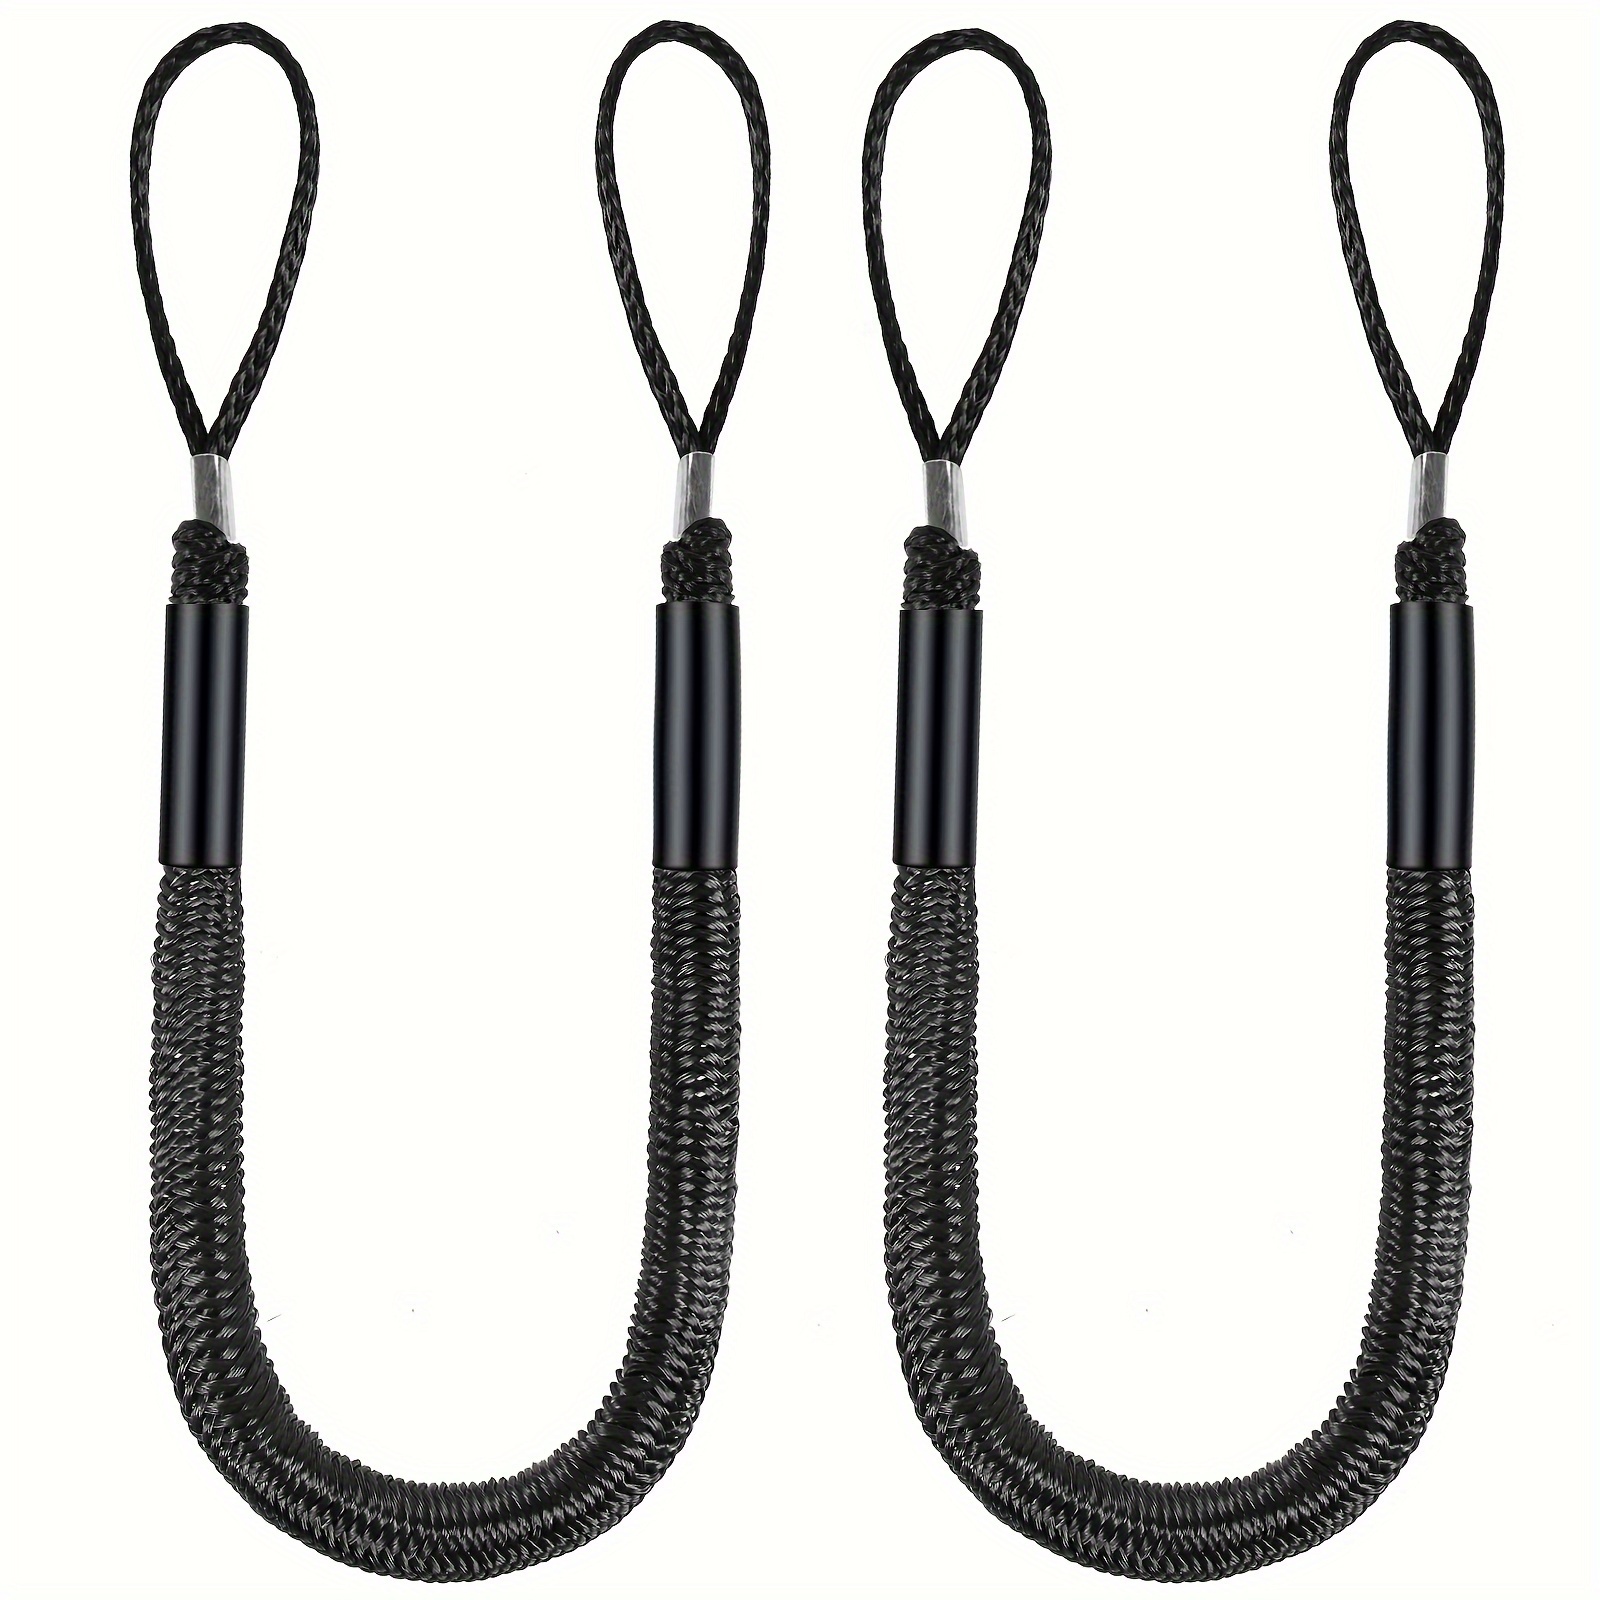 Botepon 2Pcs Boat Dock Line, Bungee Cords for Boats, Boating Gifts for Men,  Boat Accessories, Pontoon Accessories, Perfect for Bass Boat, Jon Boat